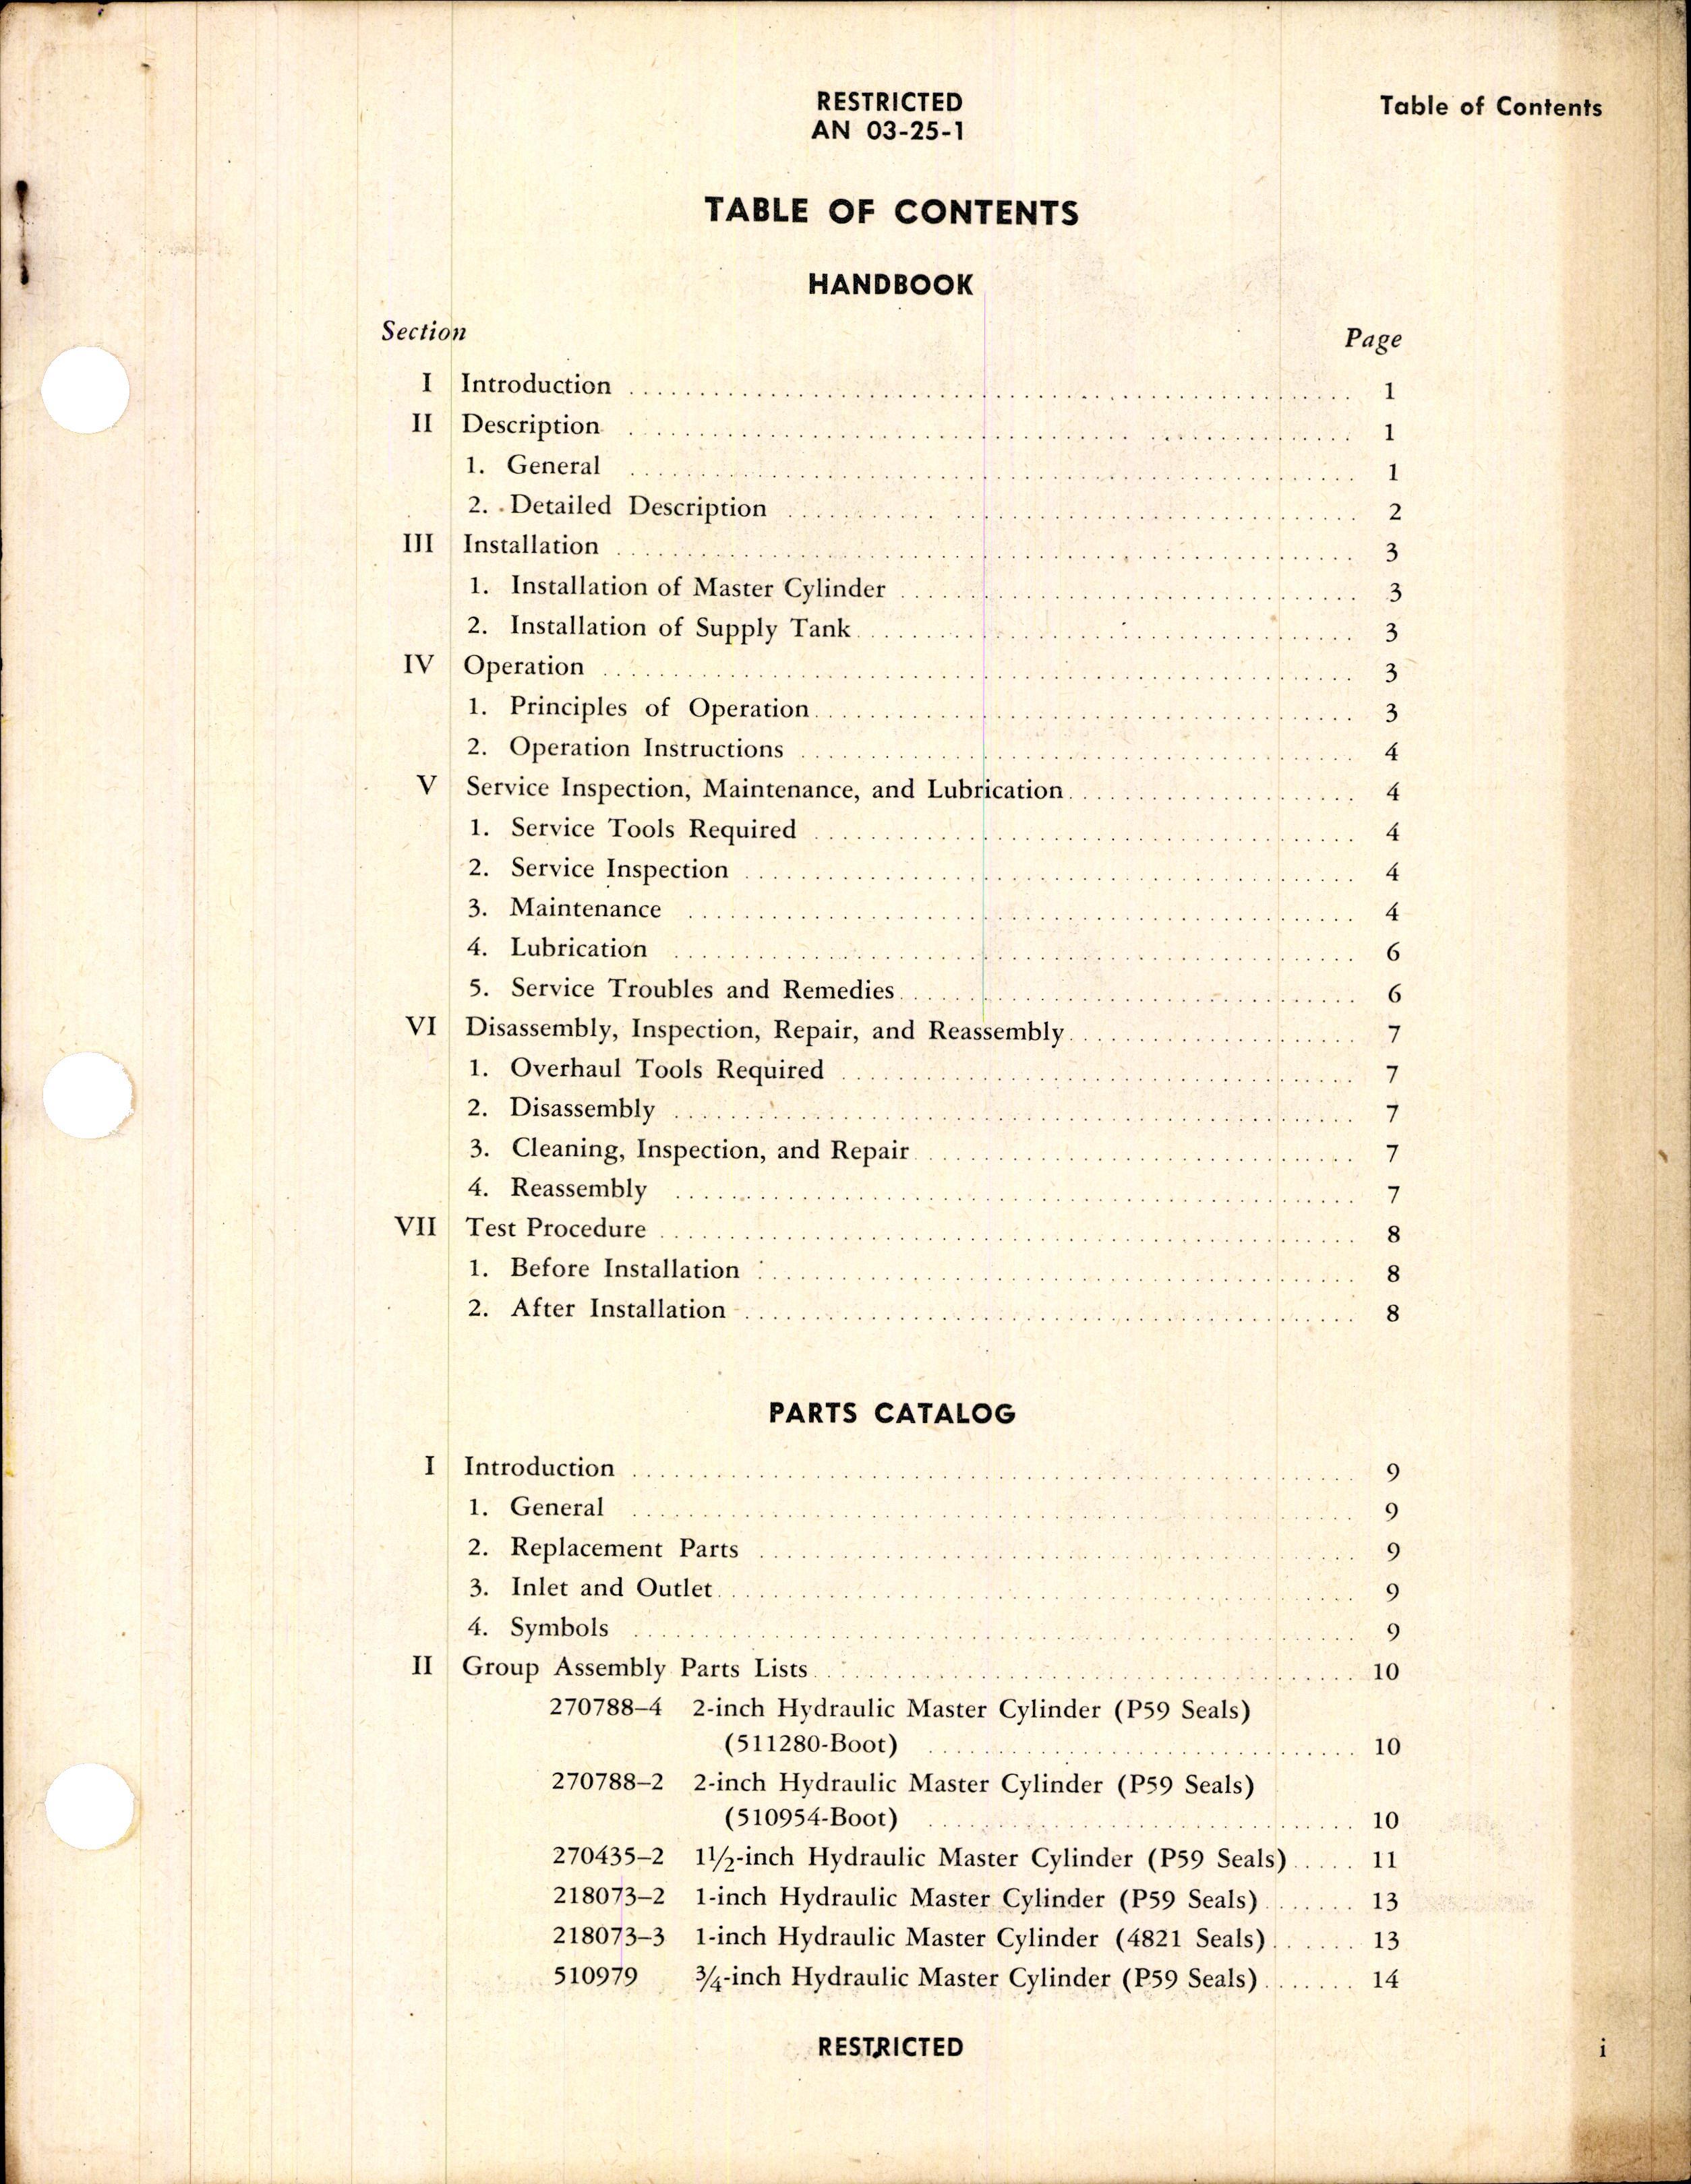 Sample page 3 from AirCorps Library document: Handbook of Instructions with Parts Catalog for Goodyear Master Brake Cylinders